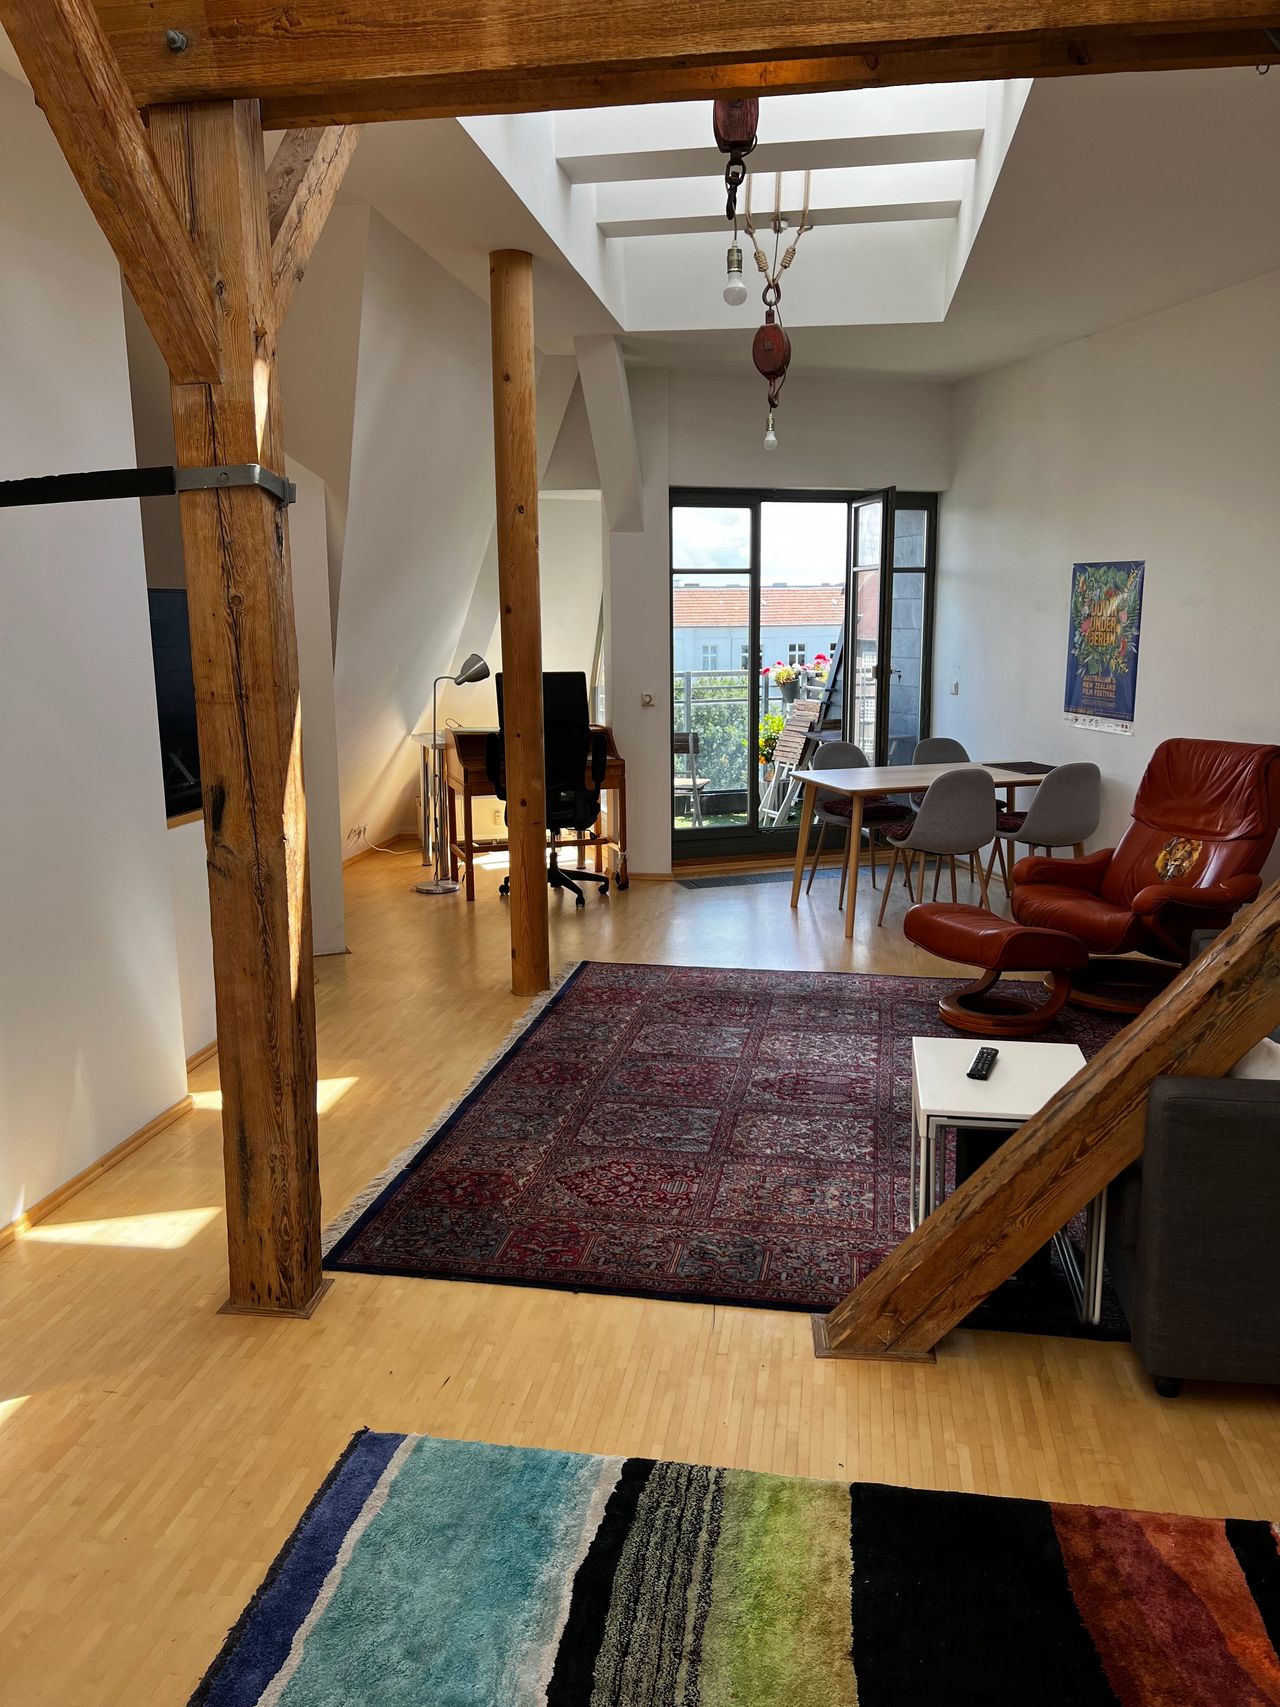 Great loft conveniently located, great view!